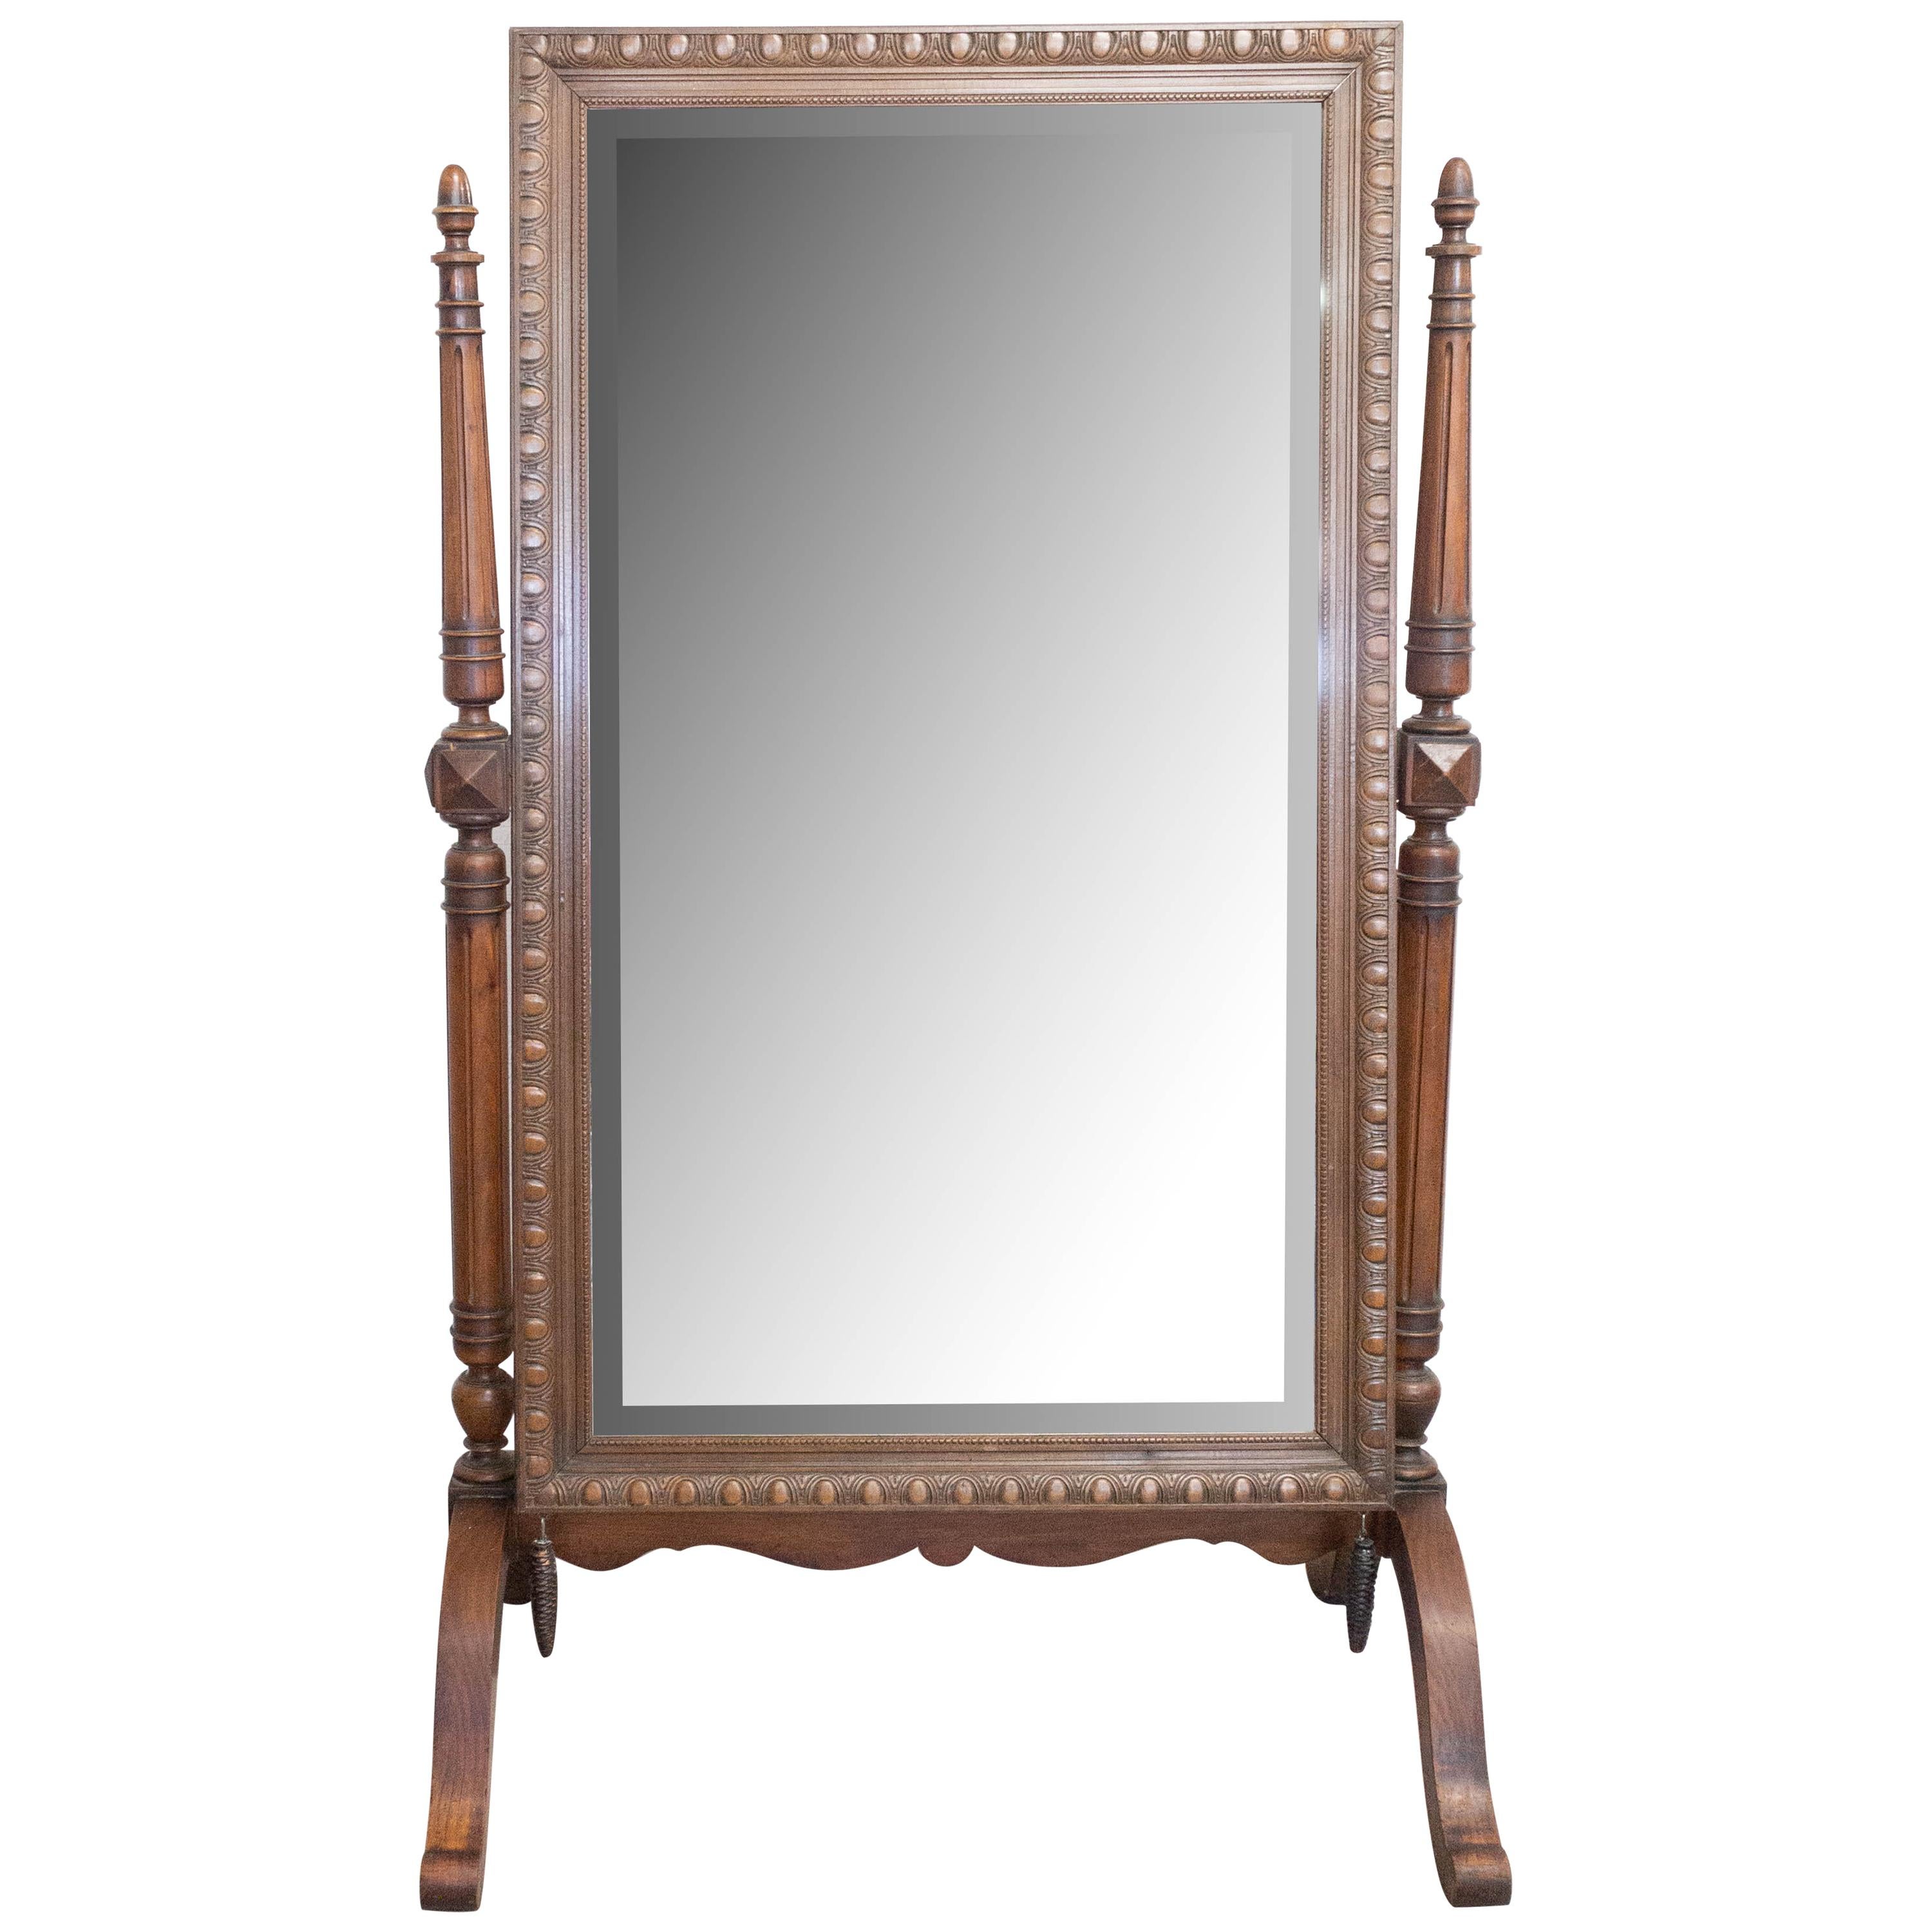 French Psyche Full Length Beveled Mirror Floor Mirror, Late 19th Century